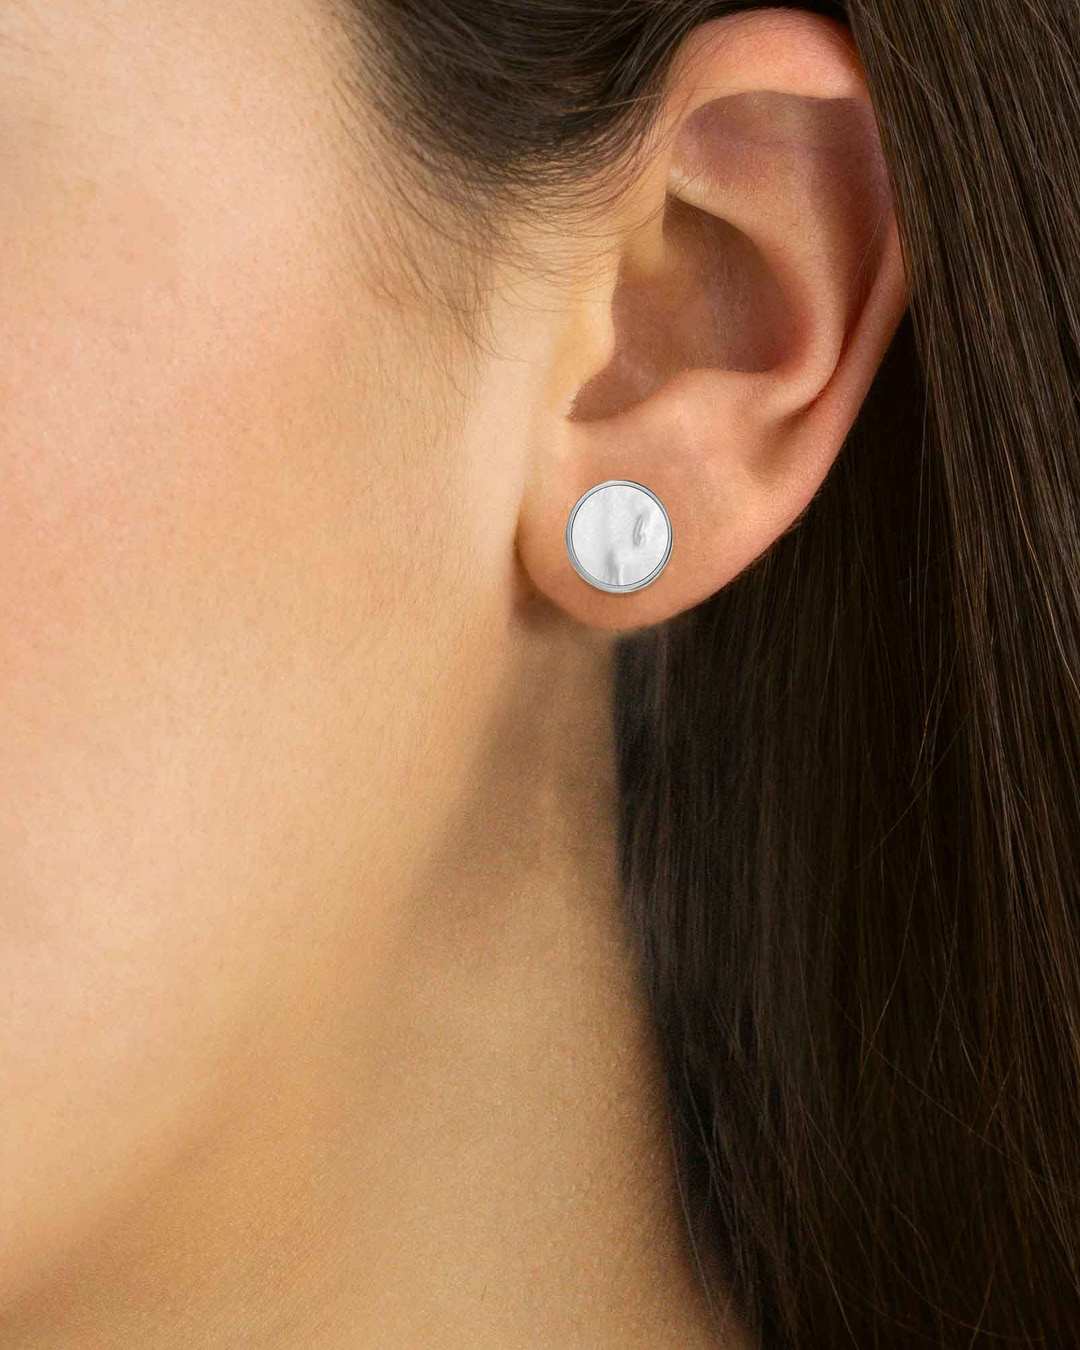 Protection Stone Mother Pearl Signature Stud Earrings, Silver